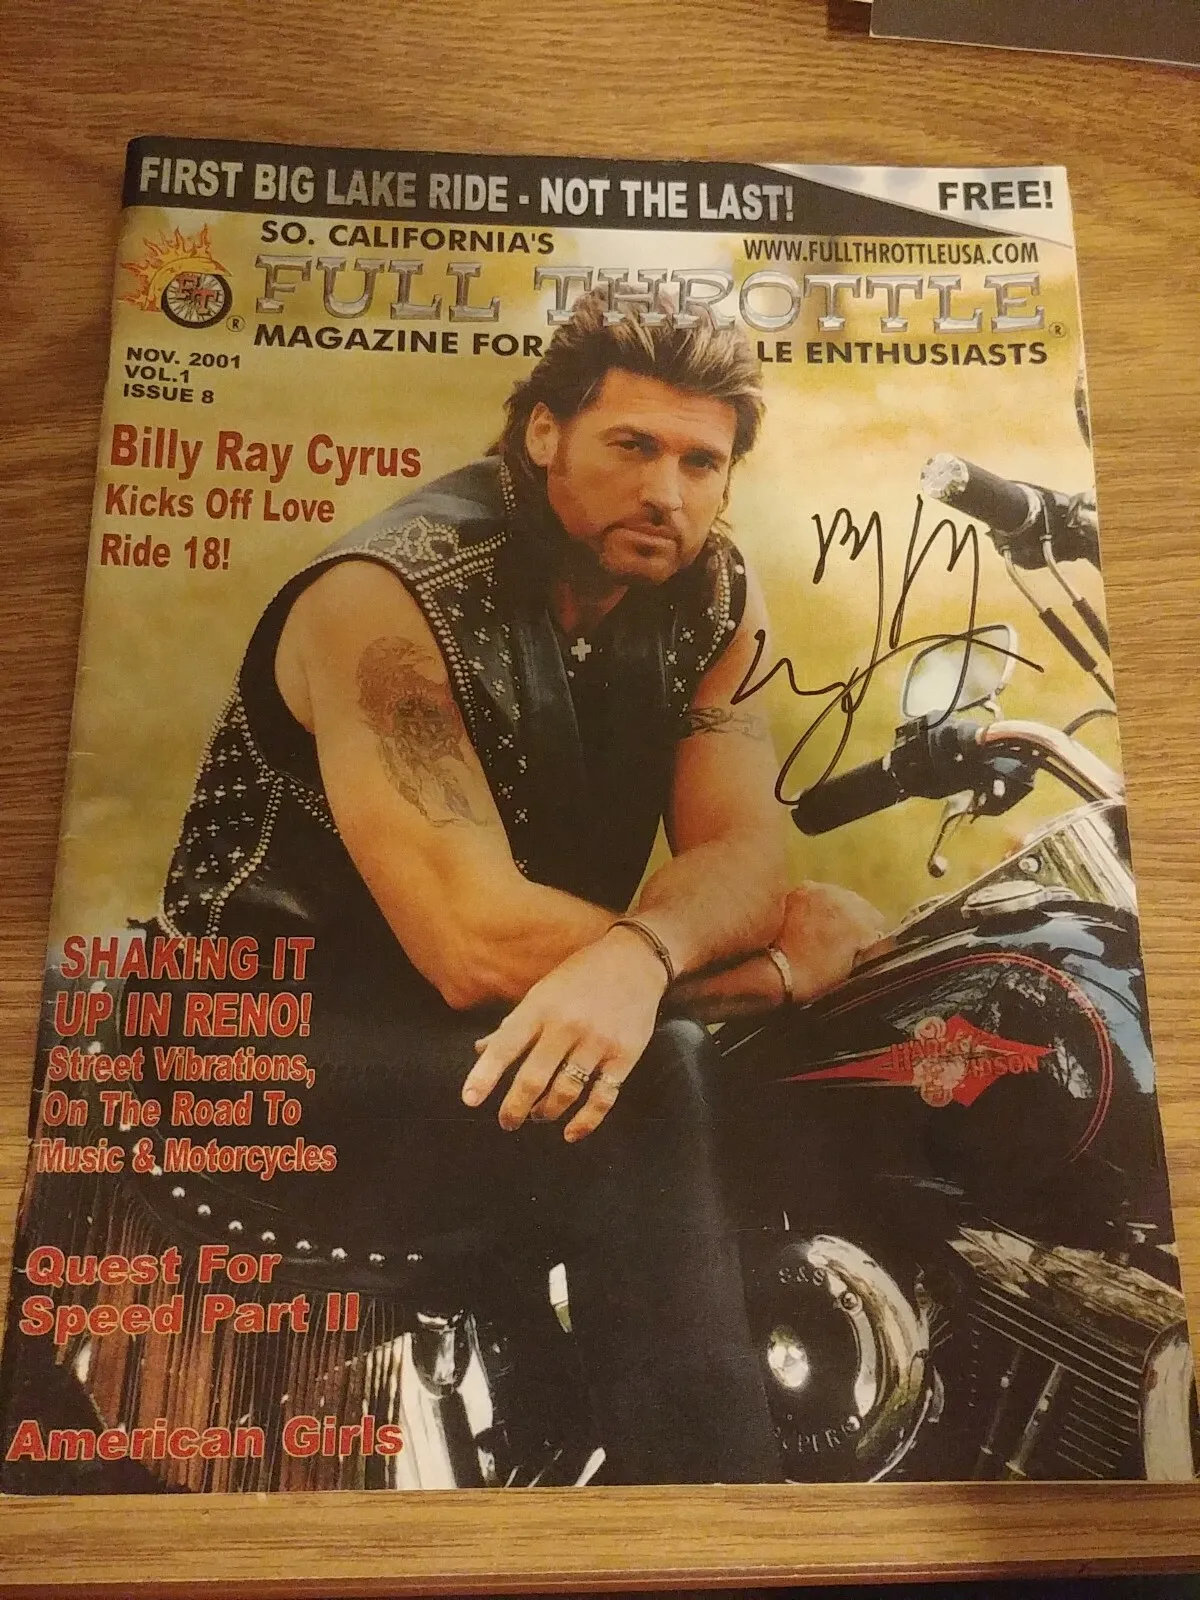 SO. CALIFORNIA'S FULL THROTTLE MAGAZINE MAY 2001 BILLY RAY CYRUS AUTOGRAPHED